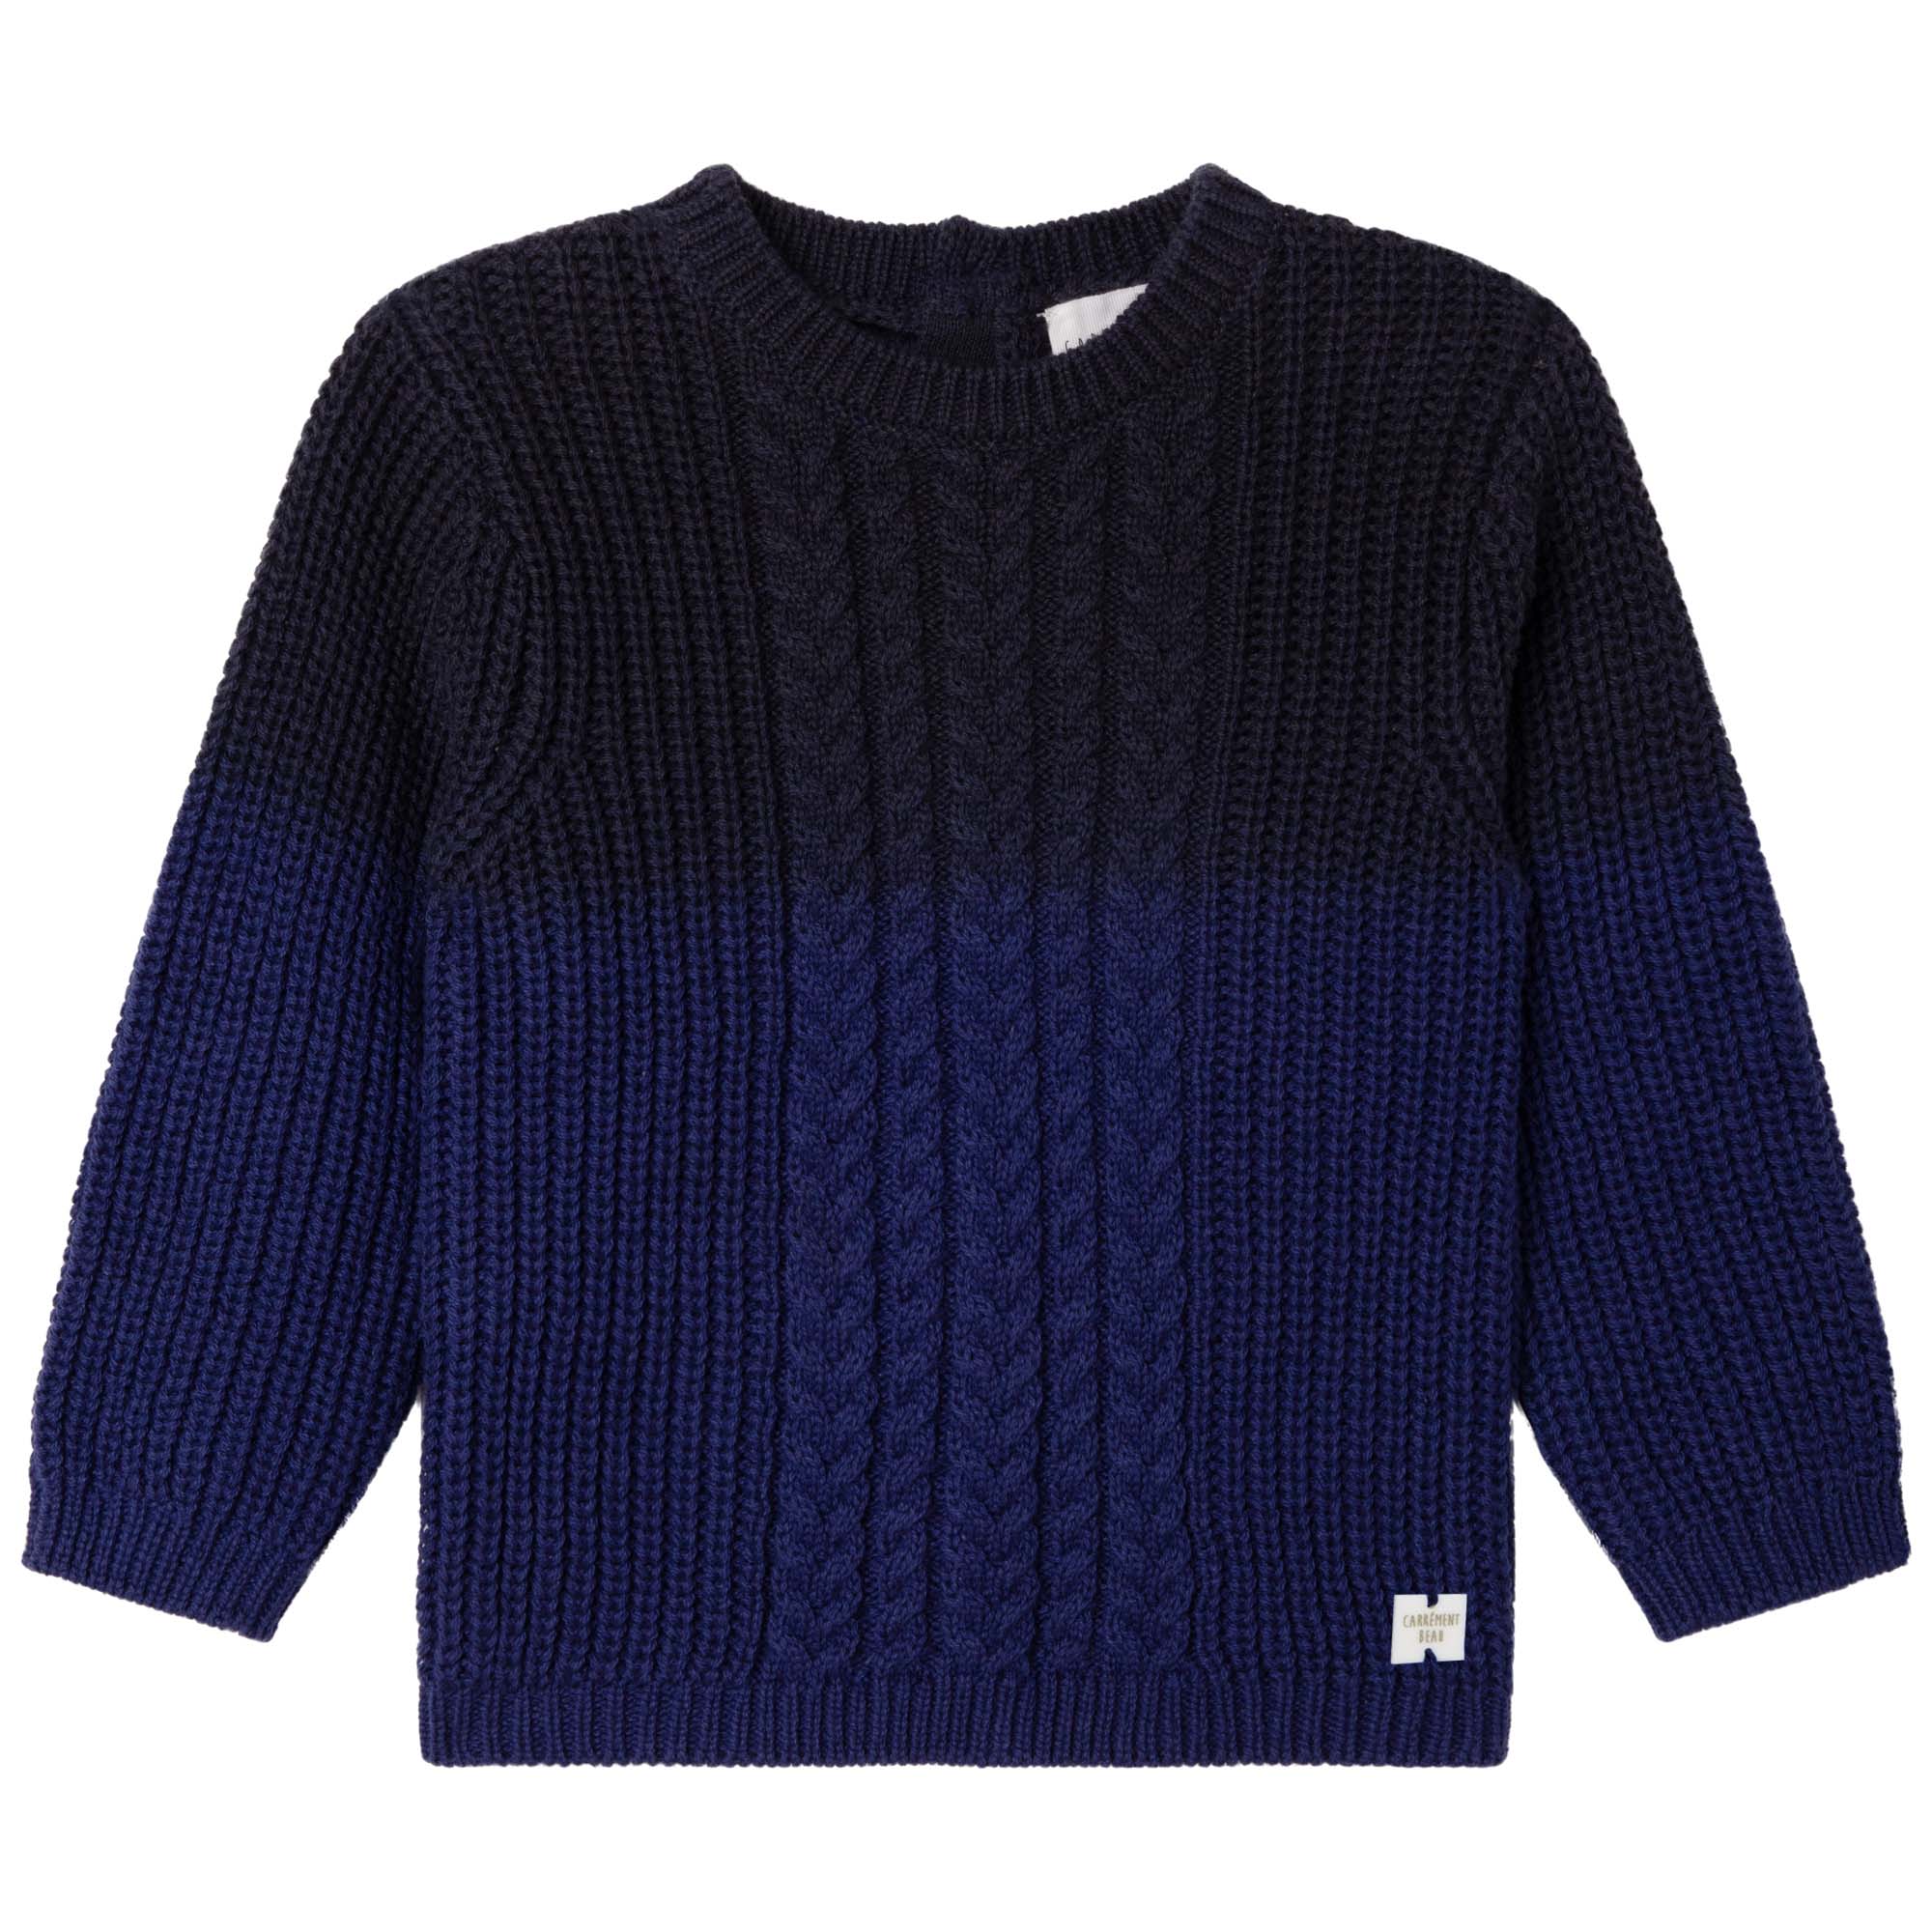 Blue 12-18M Neck & Neck cardigan KIDS FASHION Jumpers & Sweatshirts Knitted discount 89% 